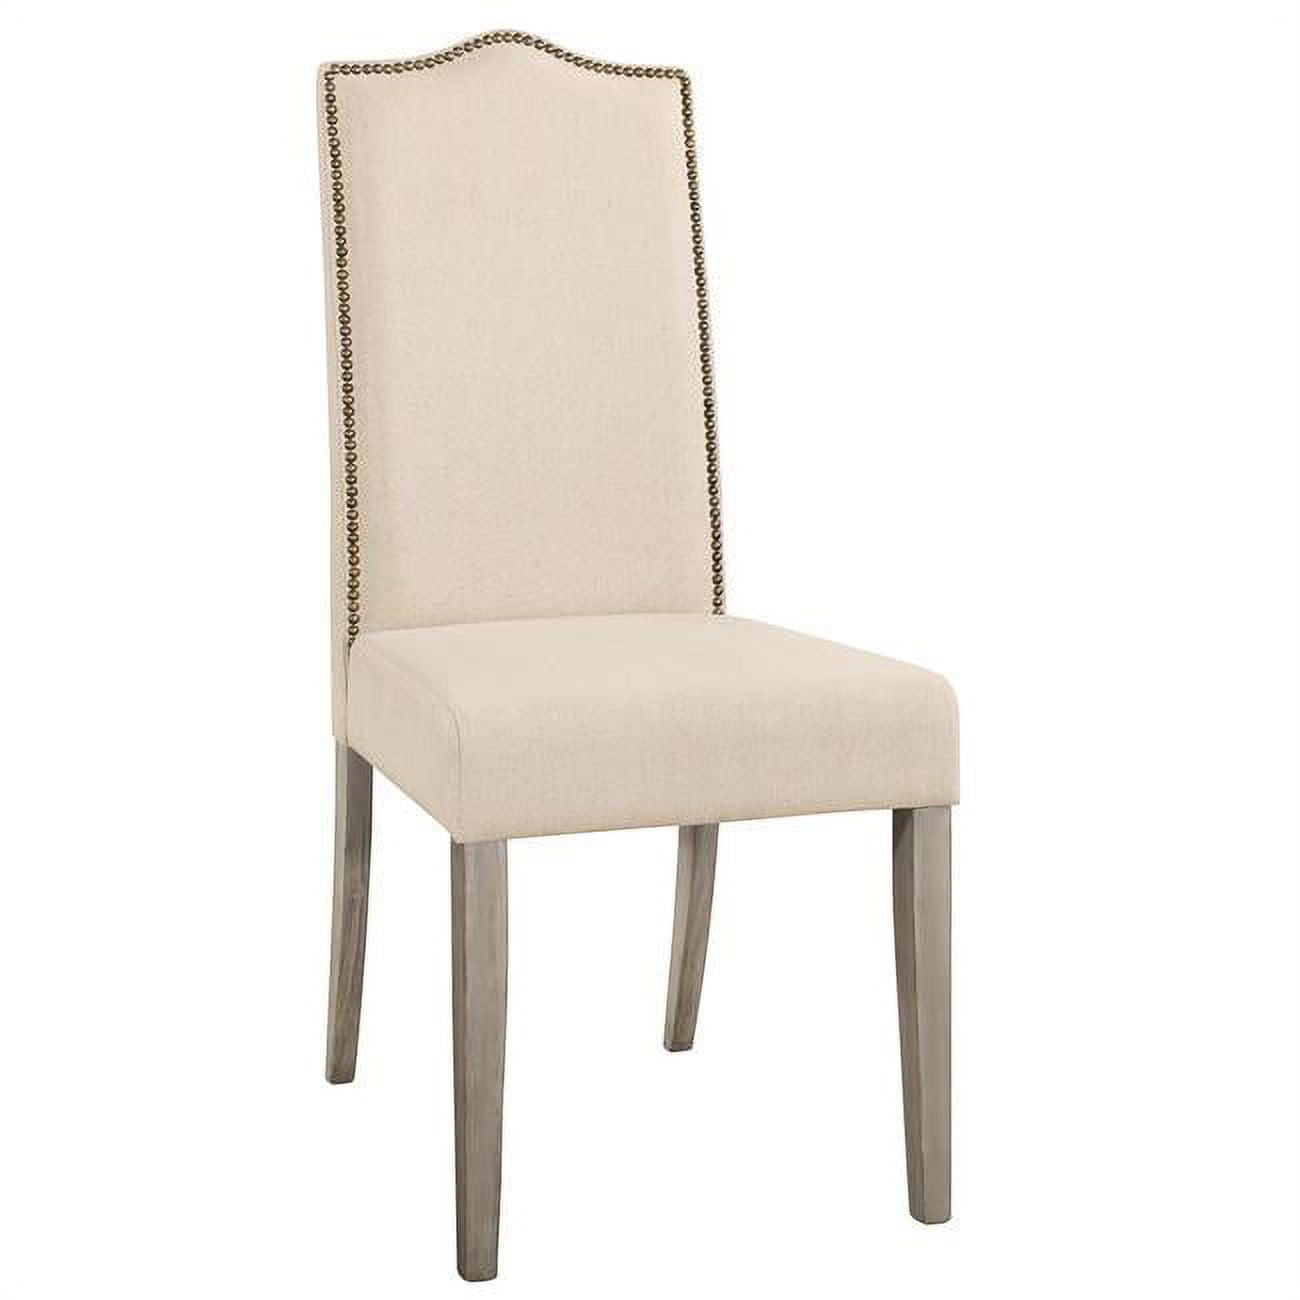 Picture of Carolina Cottage 1817-WGLN Romero Parson Chair - Weathered Gray with Linen - 22.5 x 41.5 x 18.5 in.